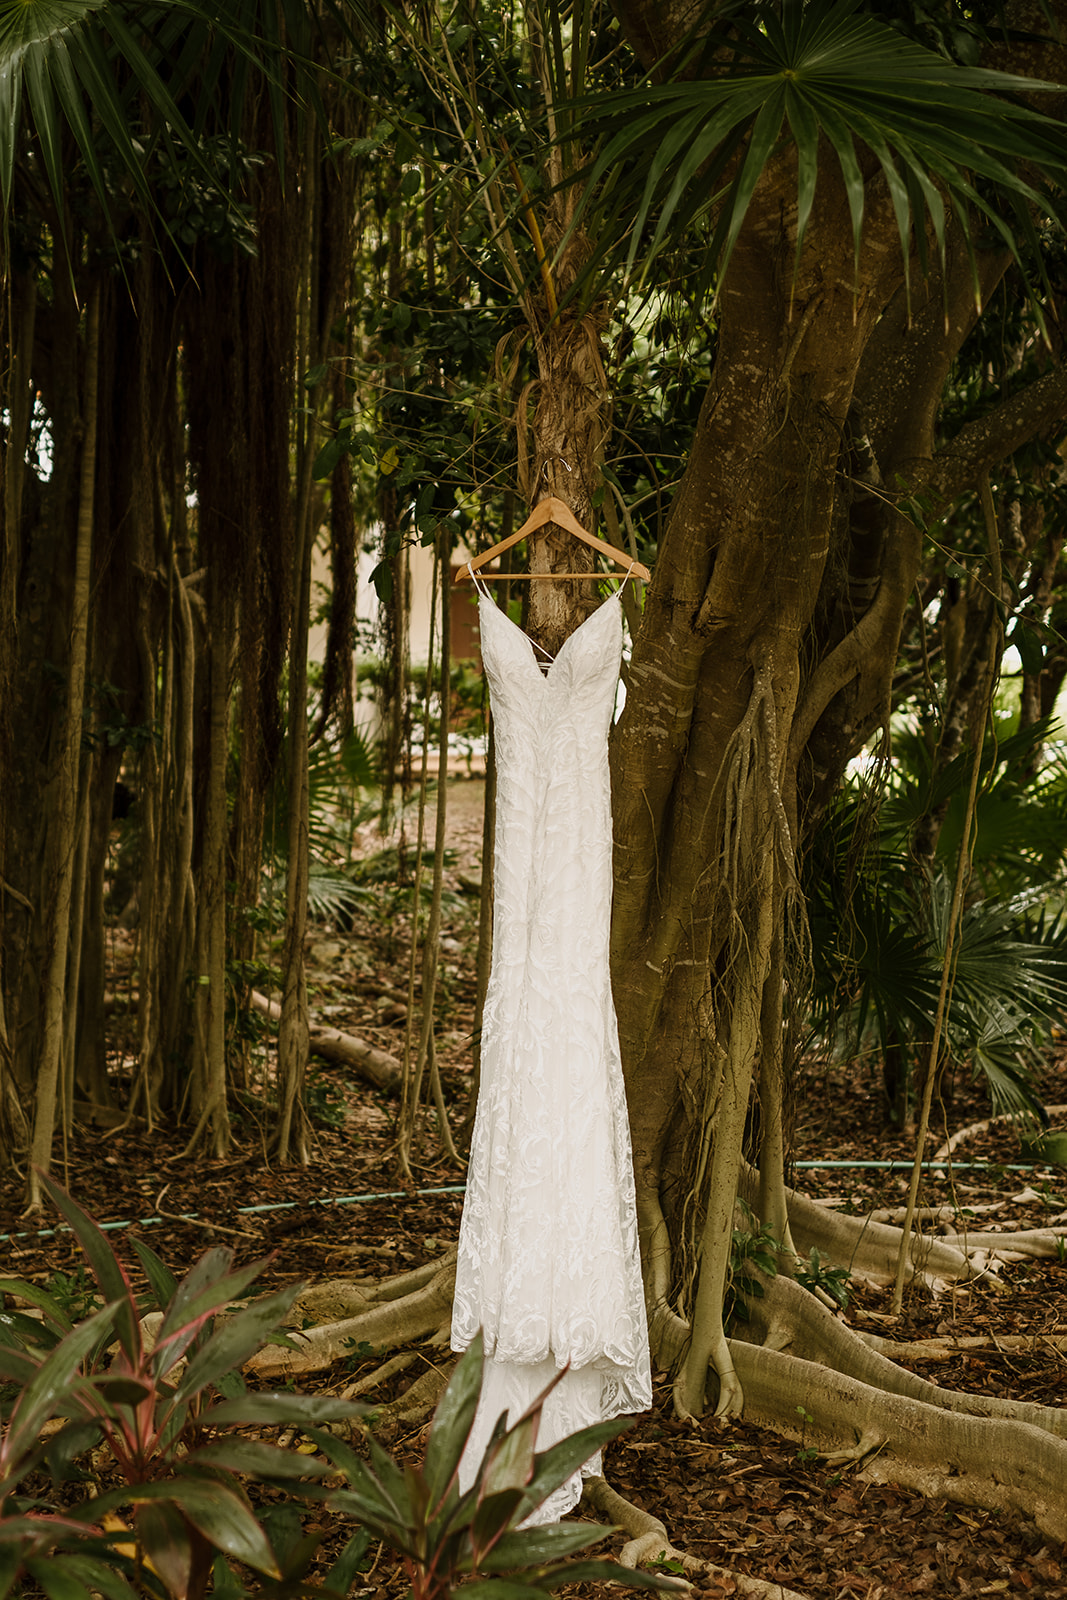 Lace wedding dress handing from tree in cancun mexico